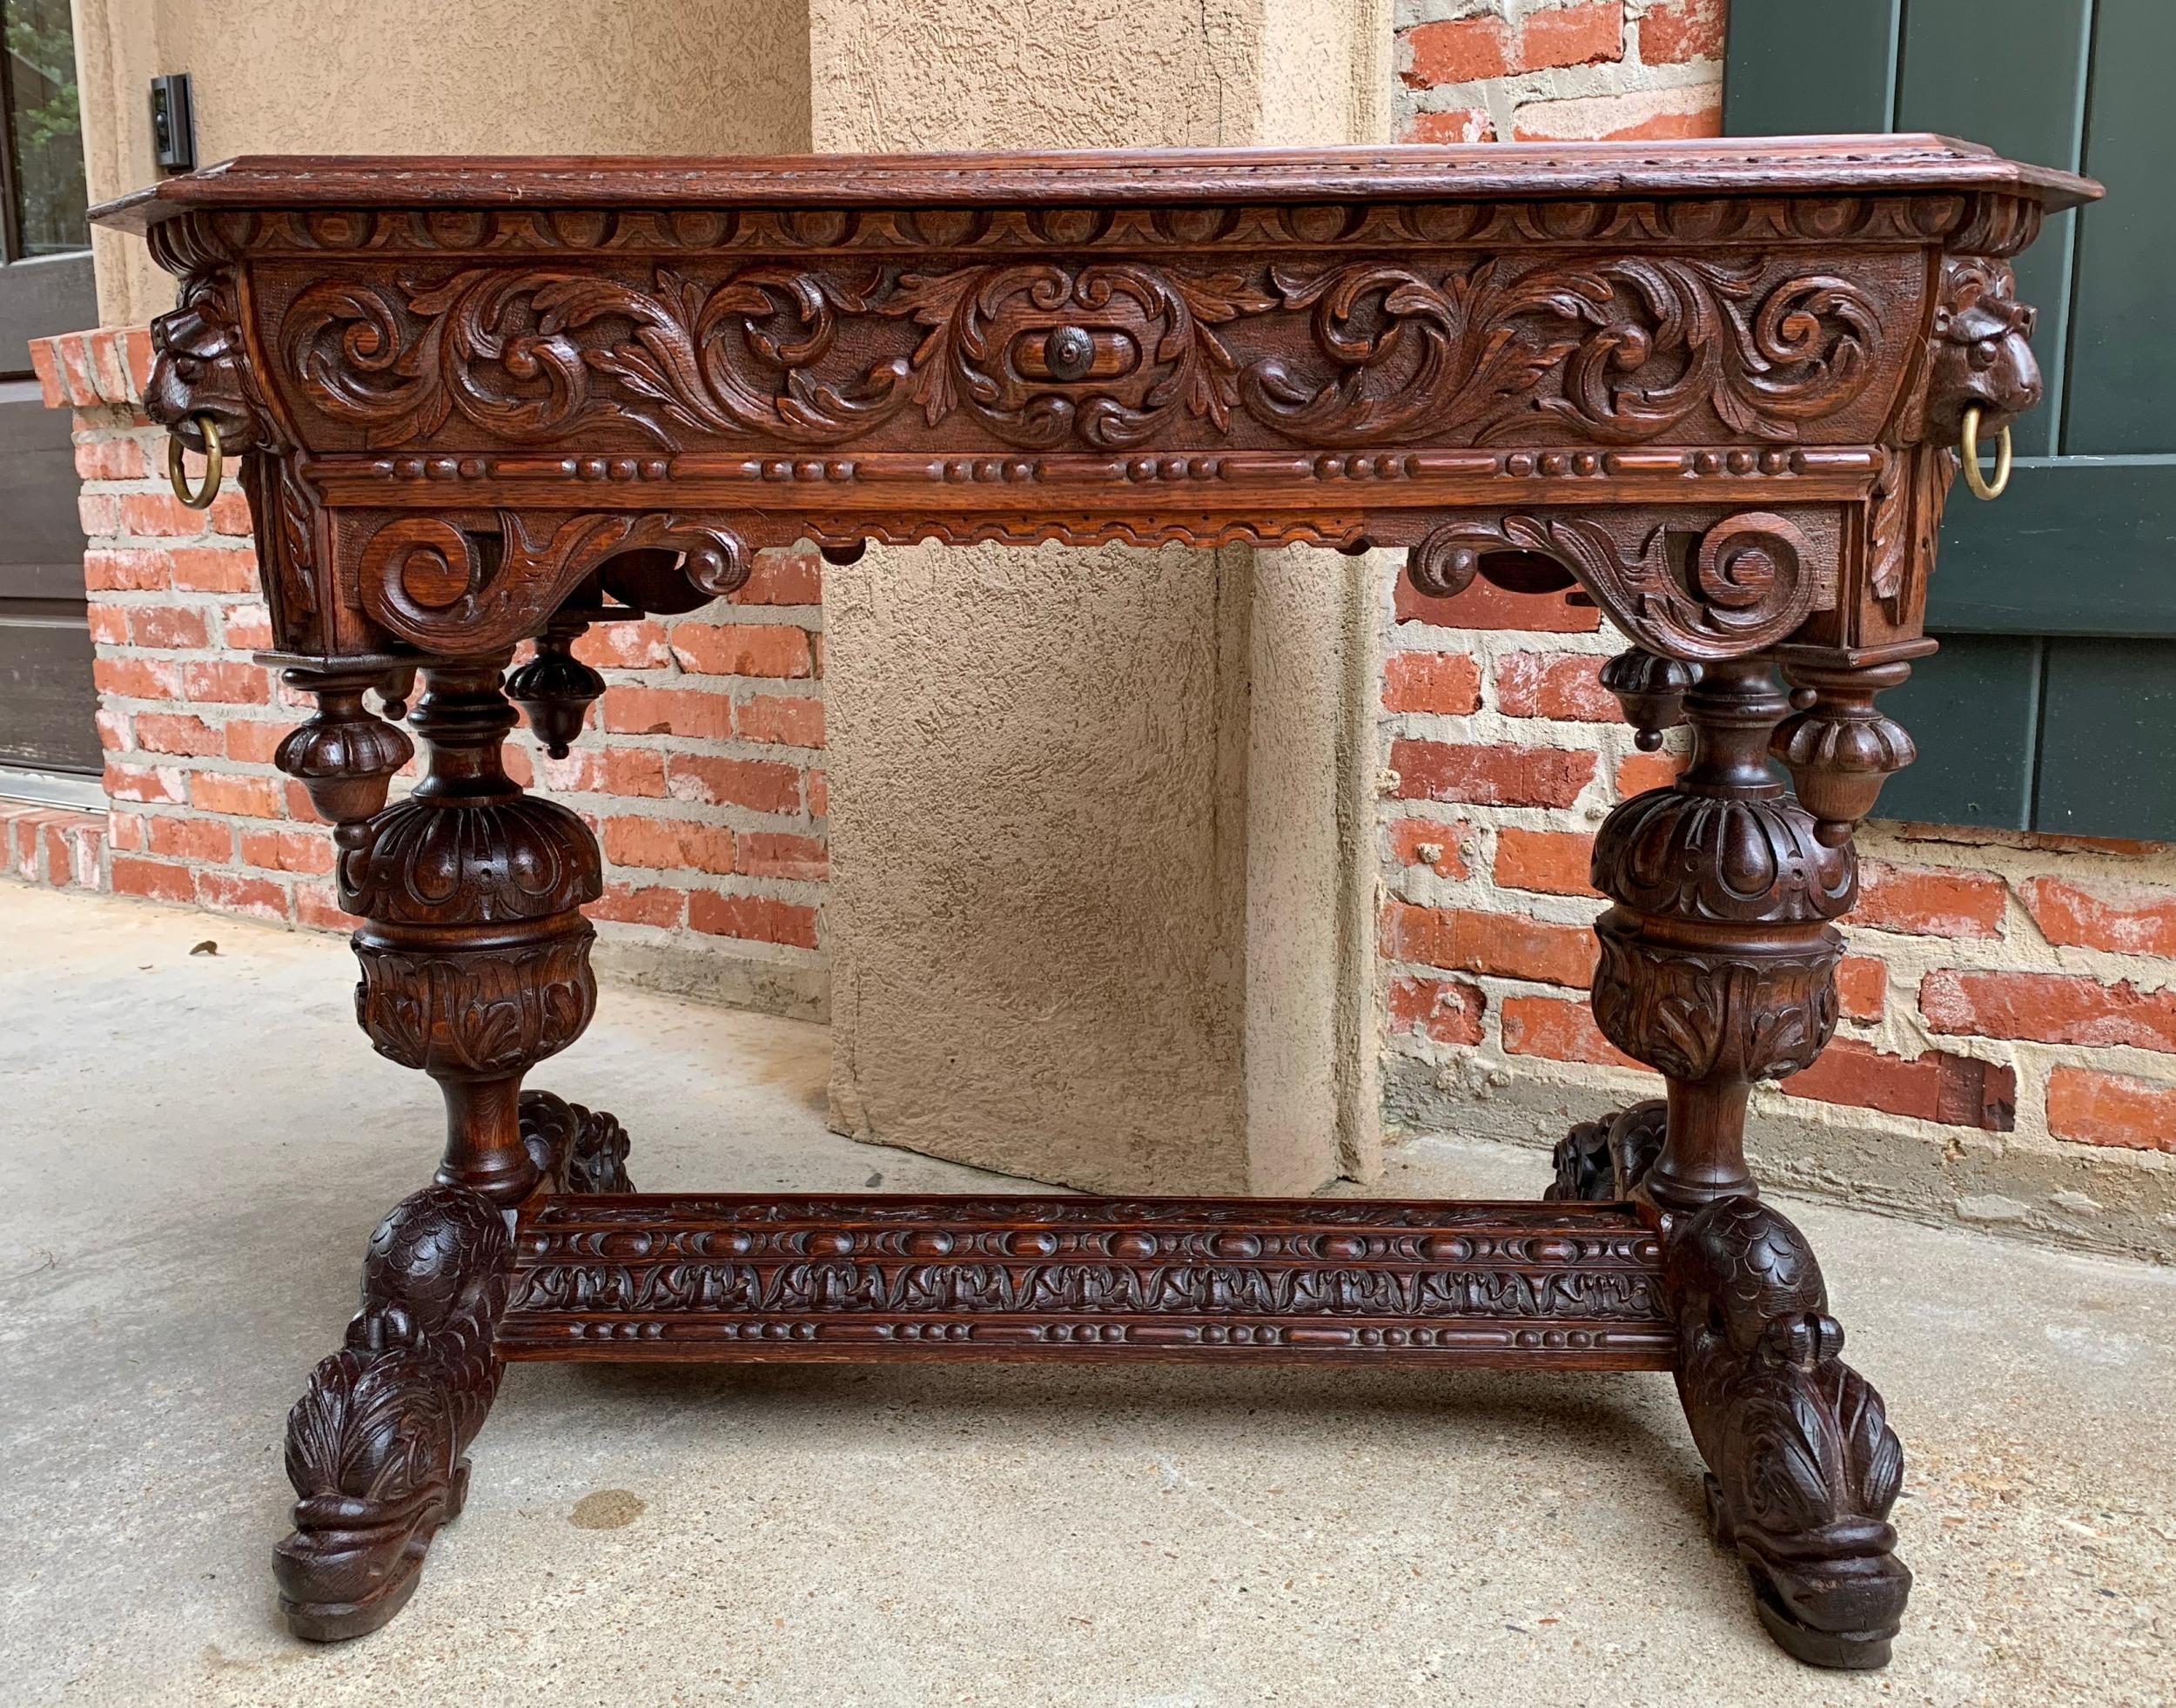 19th century antique French carved oak dolphin table desk Renaissance Gothic

~ Direct from France
An elegant antique French carved library table or 